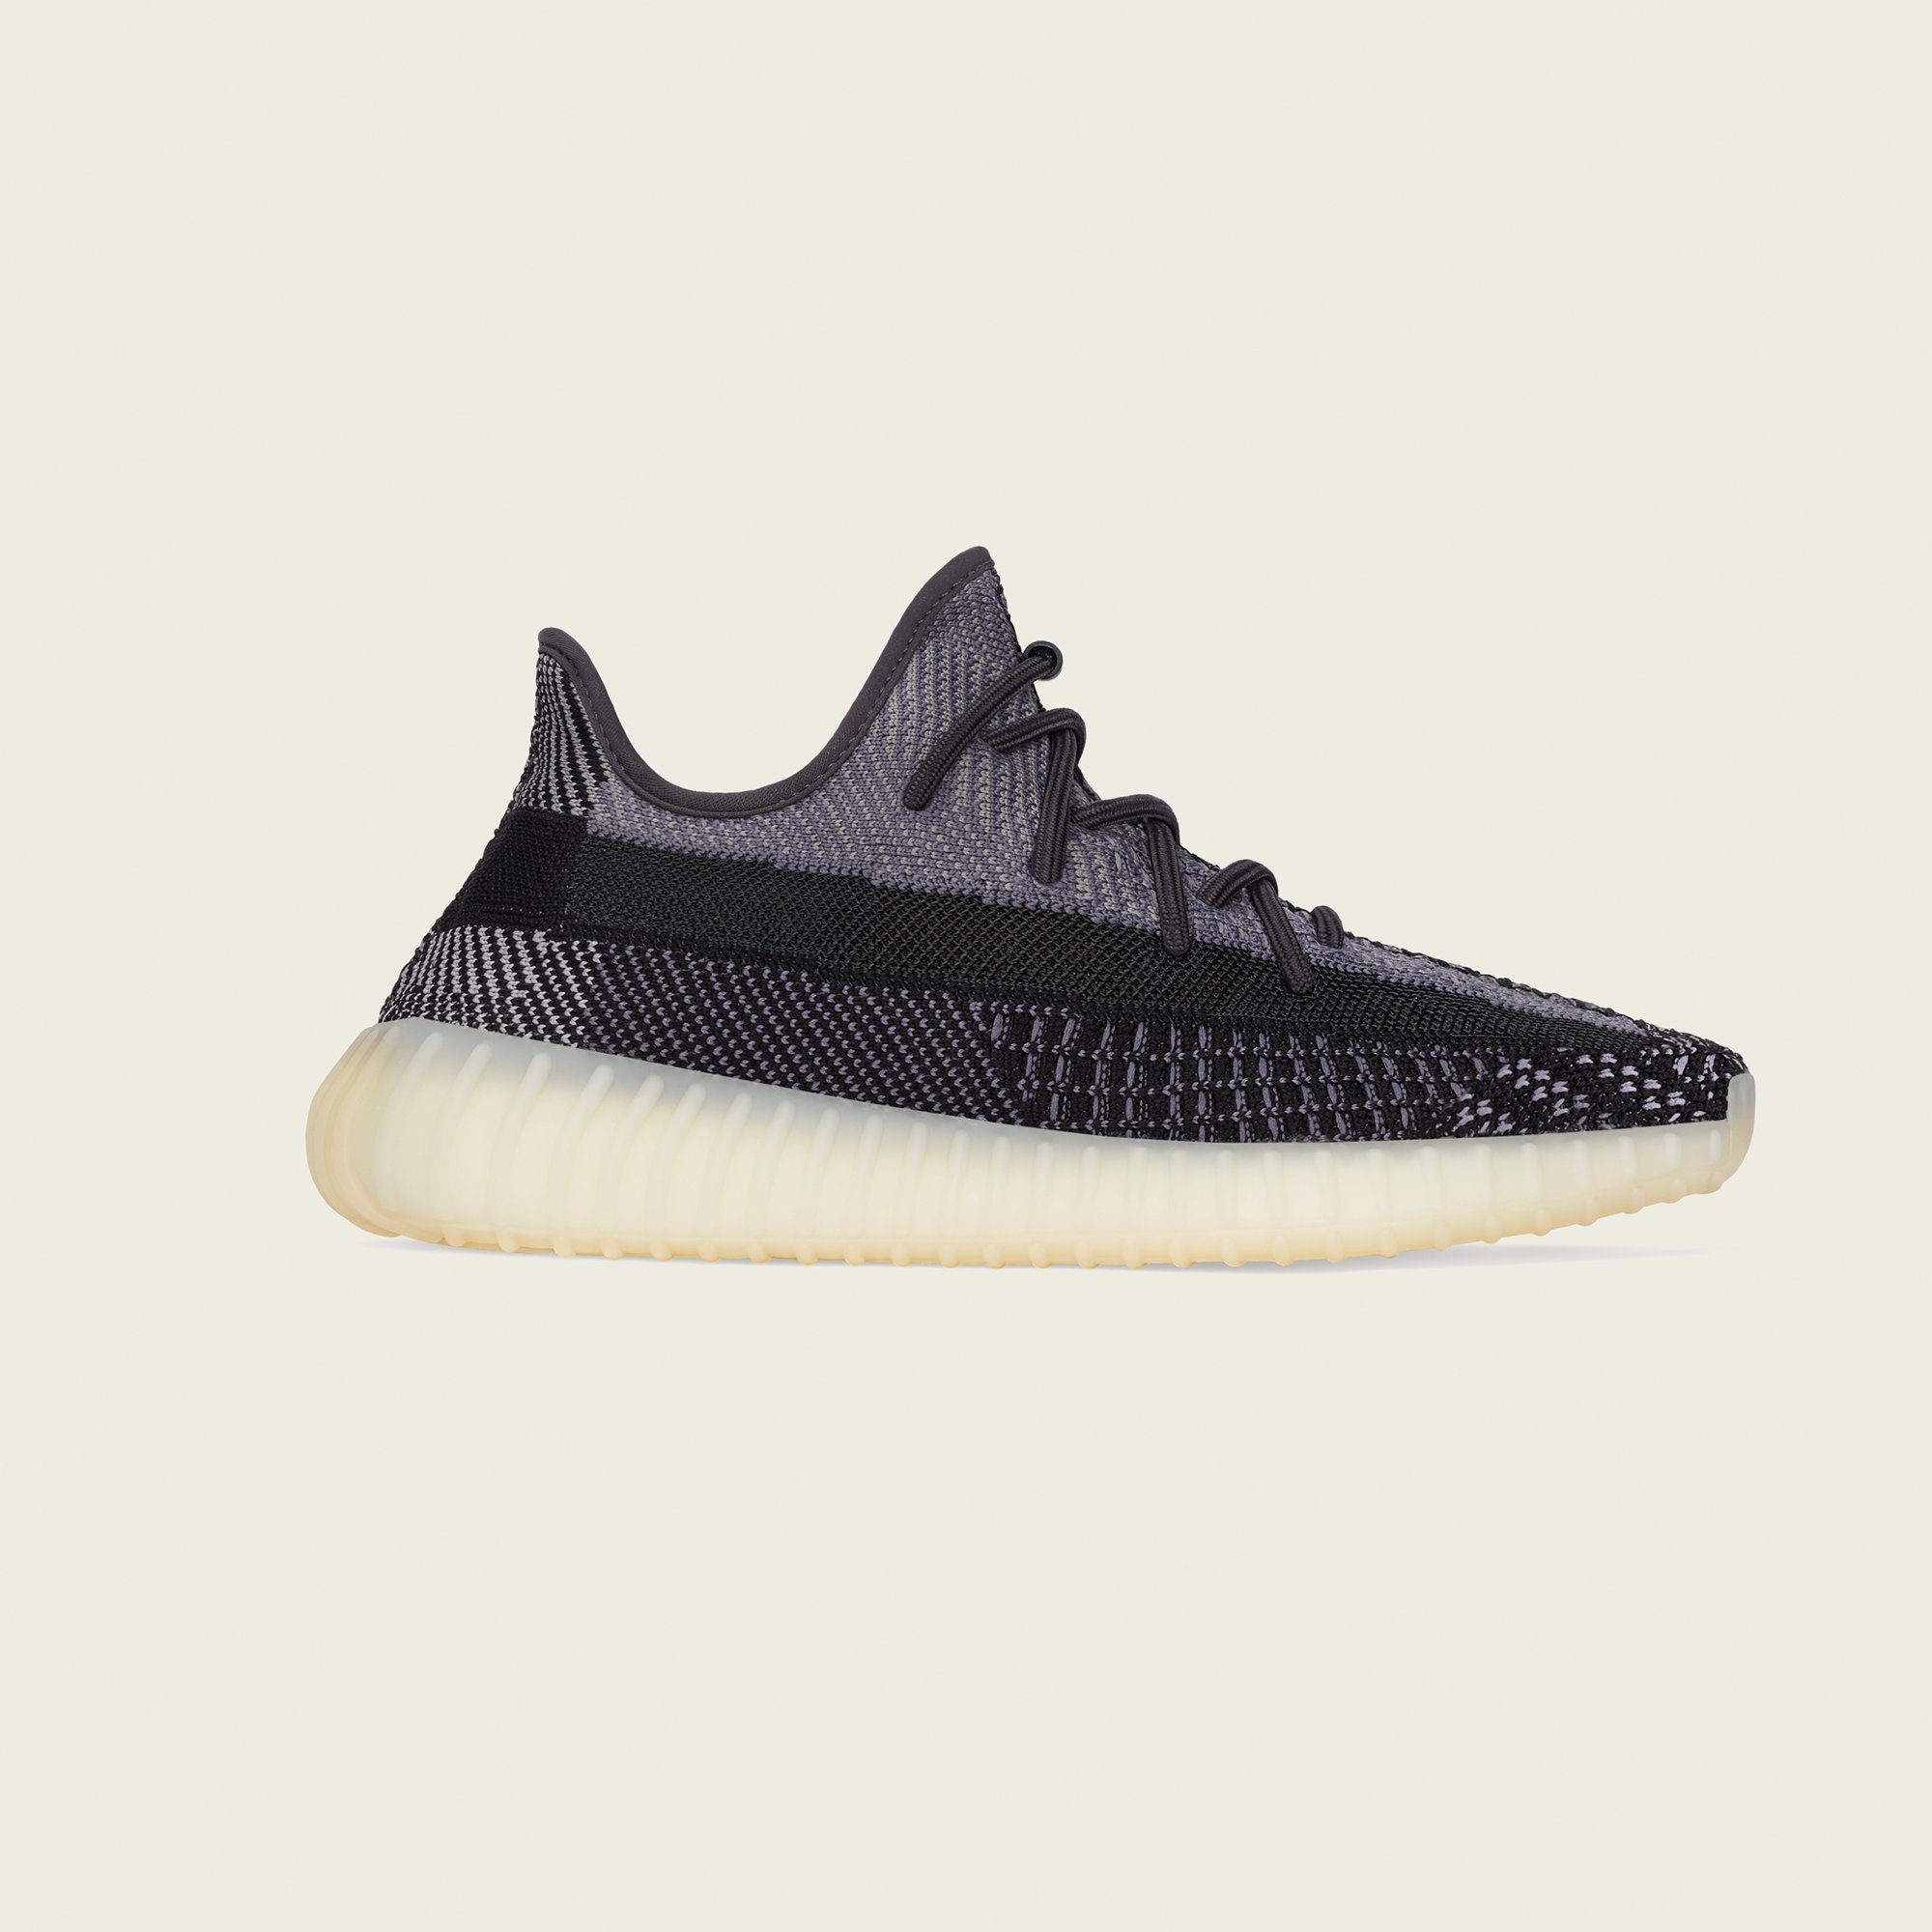 Official Look At The Adidas Yeezy Boost 350 V2 “Carbon/Asriel”